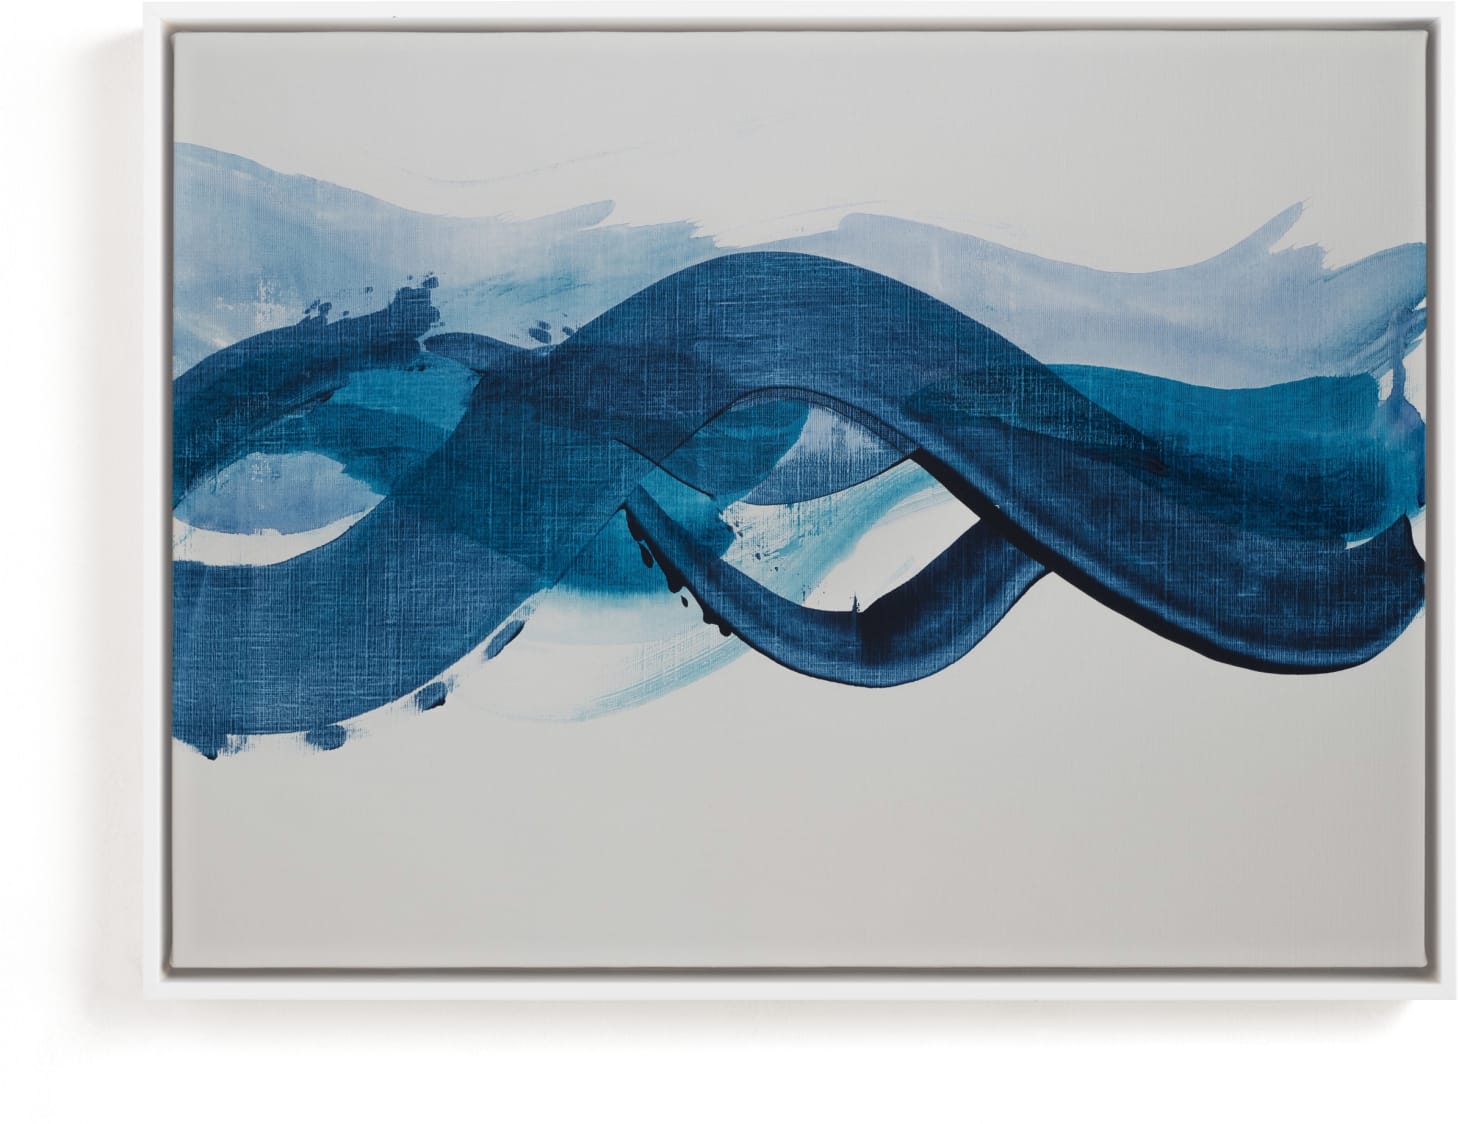 This is a blue art by Amy Gray called Rivulet.